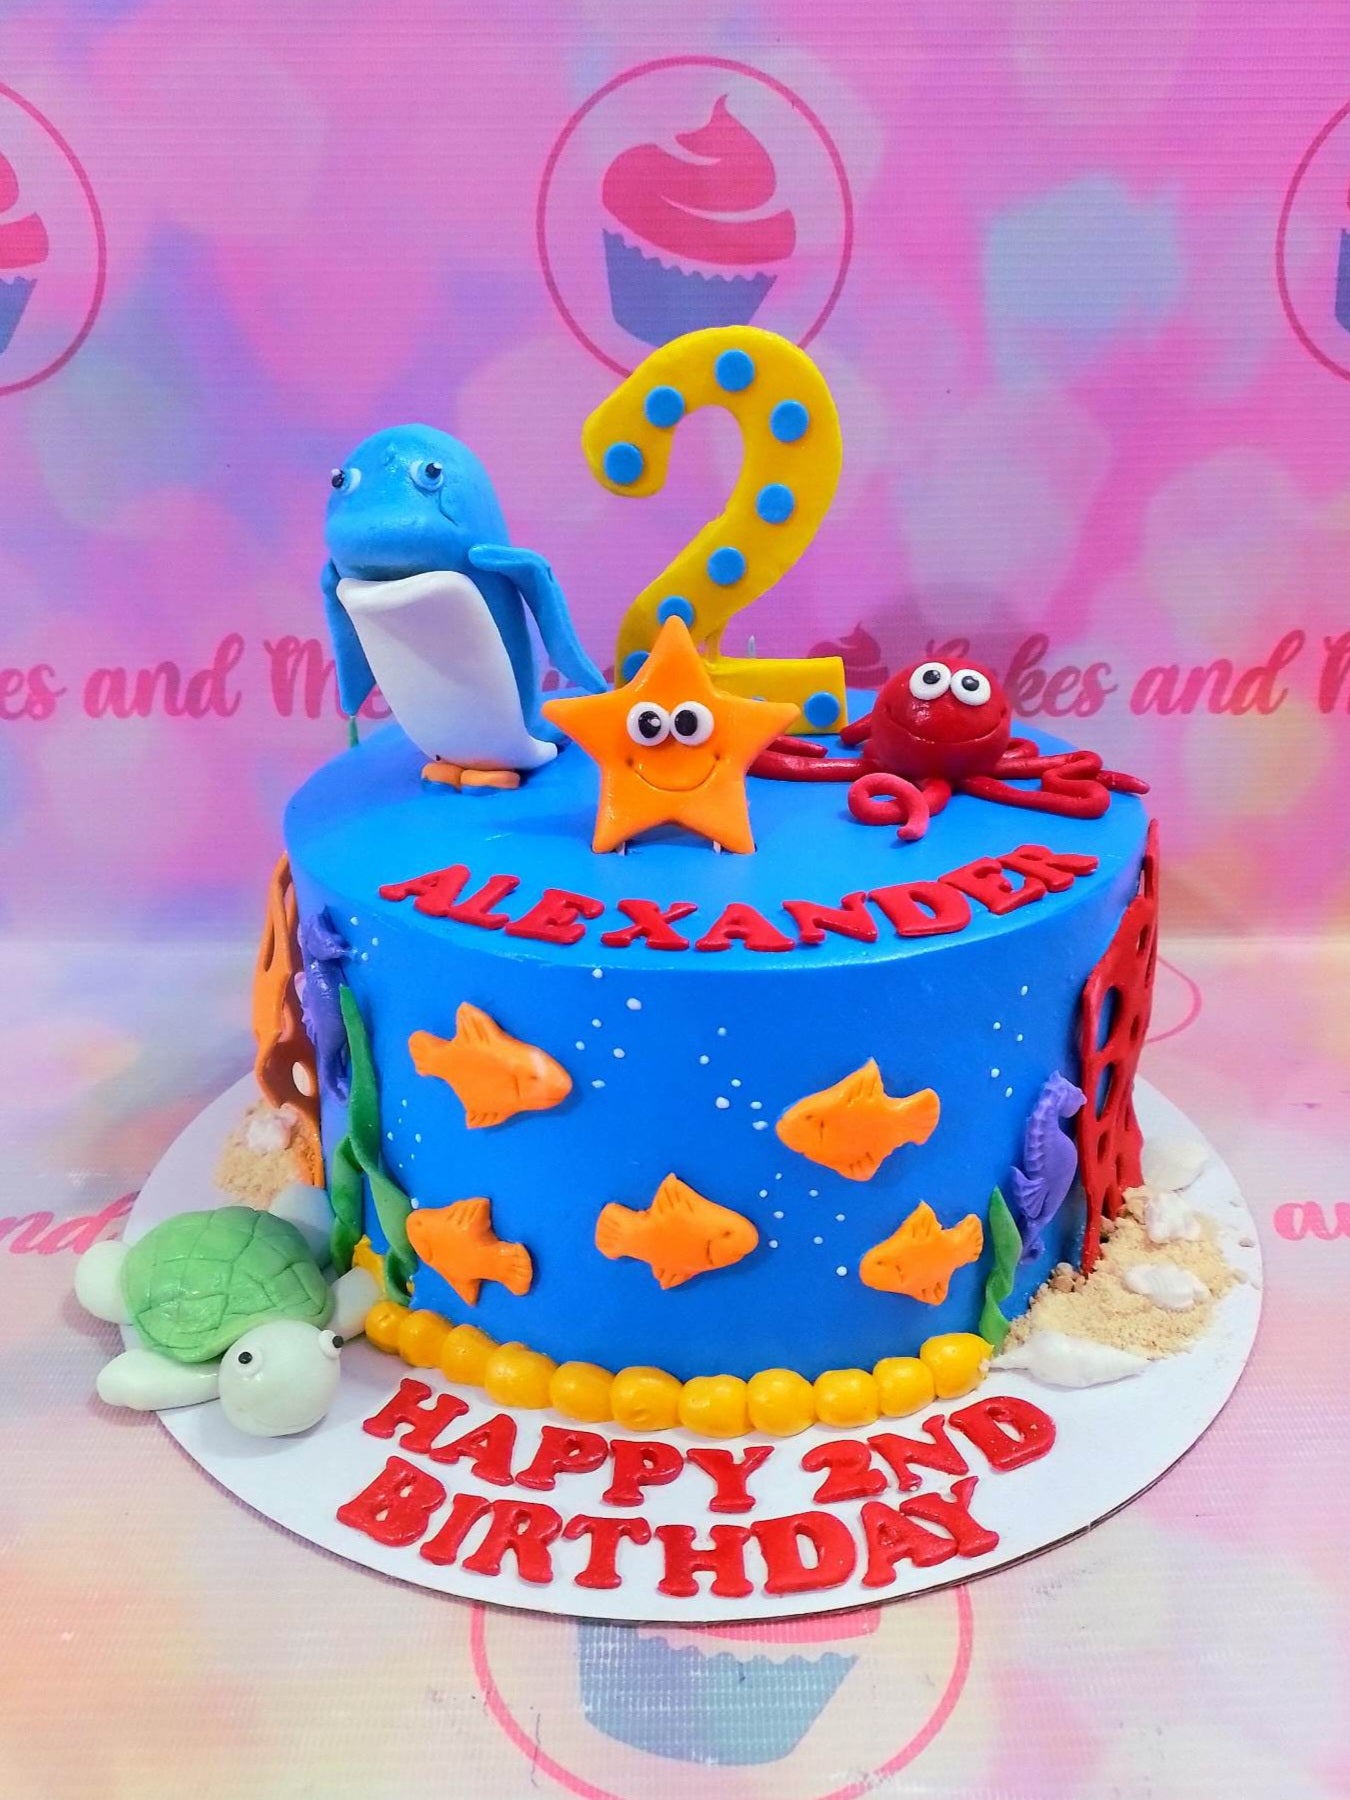 This delightful Under the Sea Cake is the perfect centerpiece for your little girl's birthday party. It is custom-decorated with ocean blue frosting and accented with perfect details like starfish, dolphins, crabs, and lobsters. It will be sure to bring a cheerful atmosphere to your special occasion.